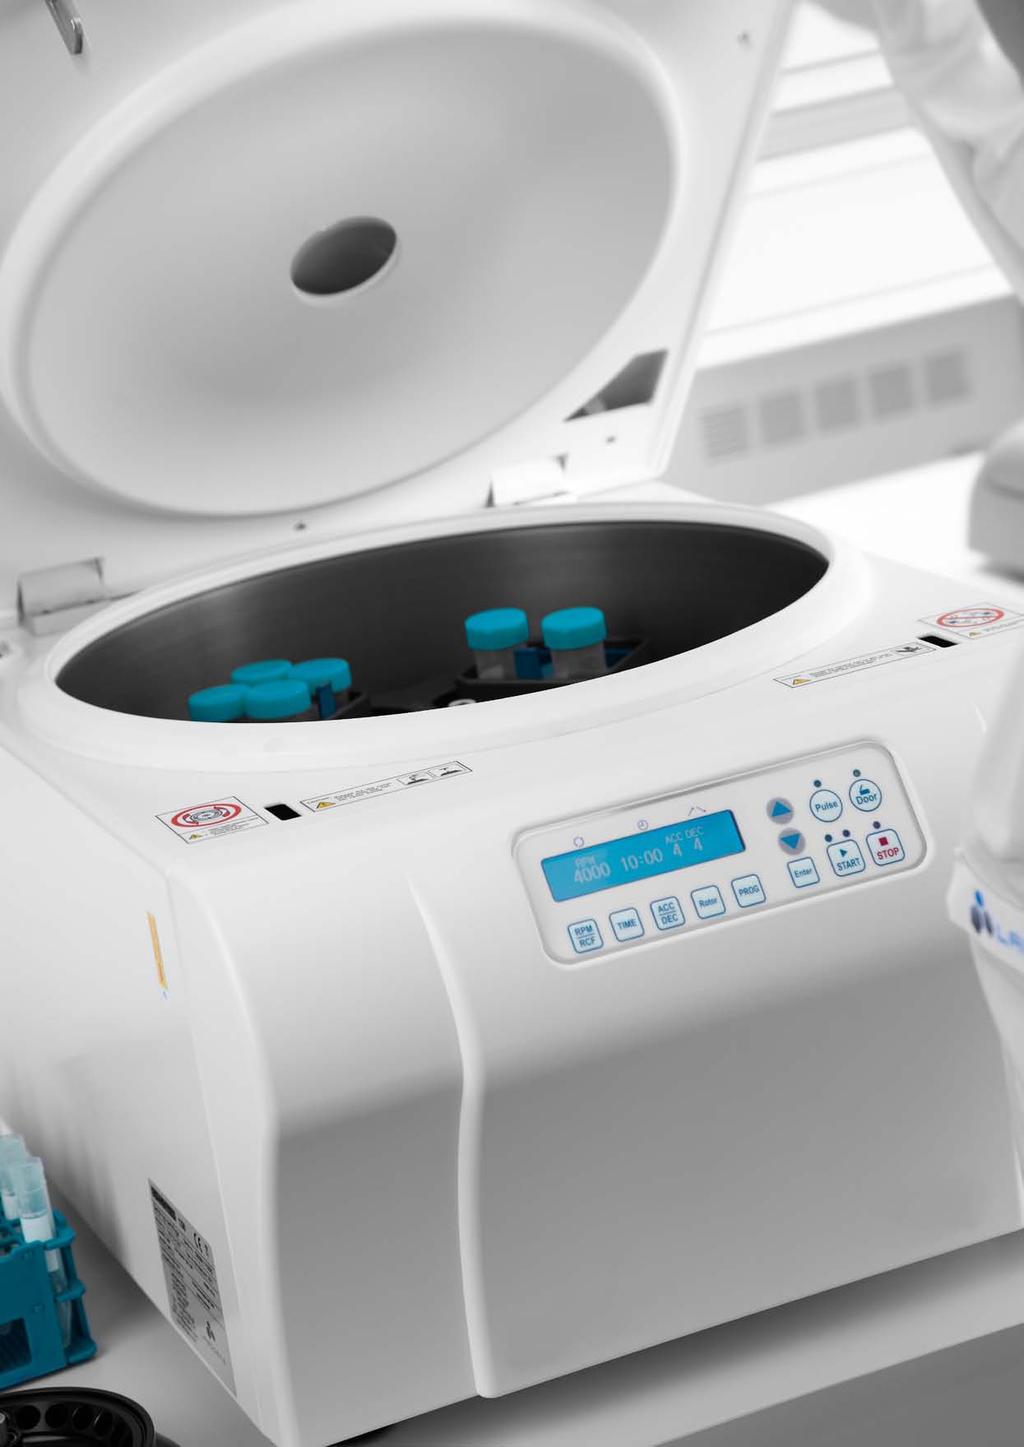 THE SCANSPEED MULTIPURPOSE FAMiLY OFFERS The ideal high speed centrifuge range of high speed centrifuges for general laboratory applications, including biological sample separations of cellular